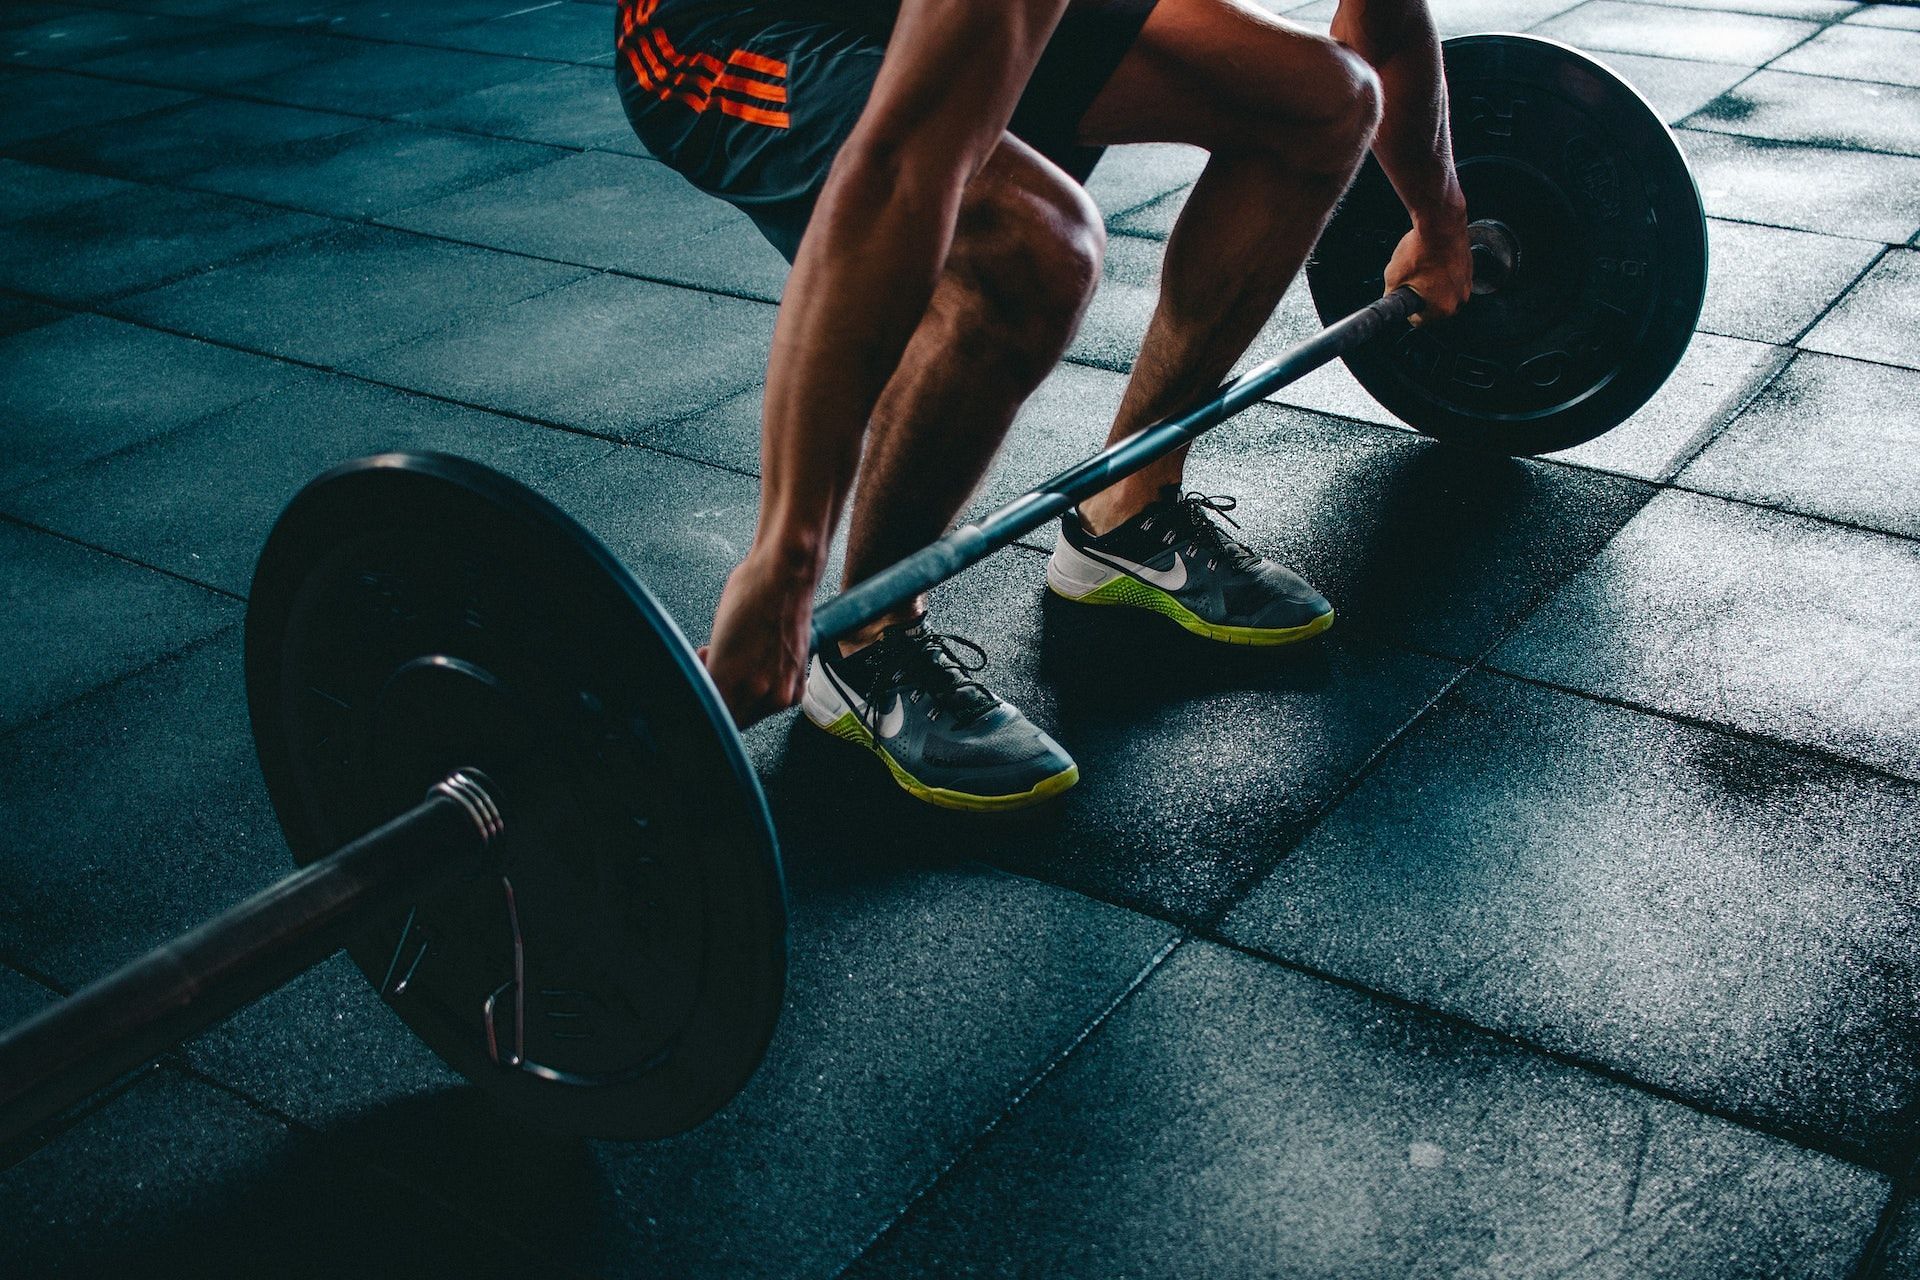 Intense workouts can lead to SI joint pain. (Photo via Pexels/Victor Freitas)